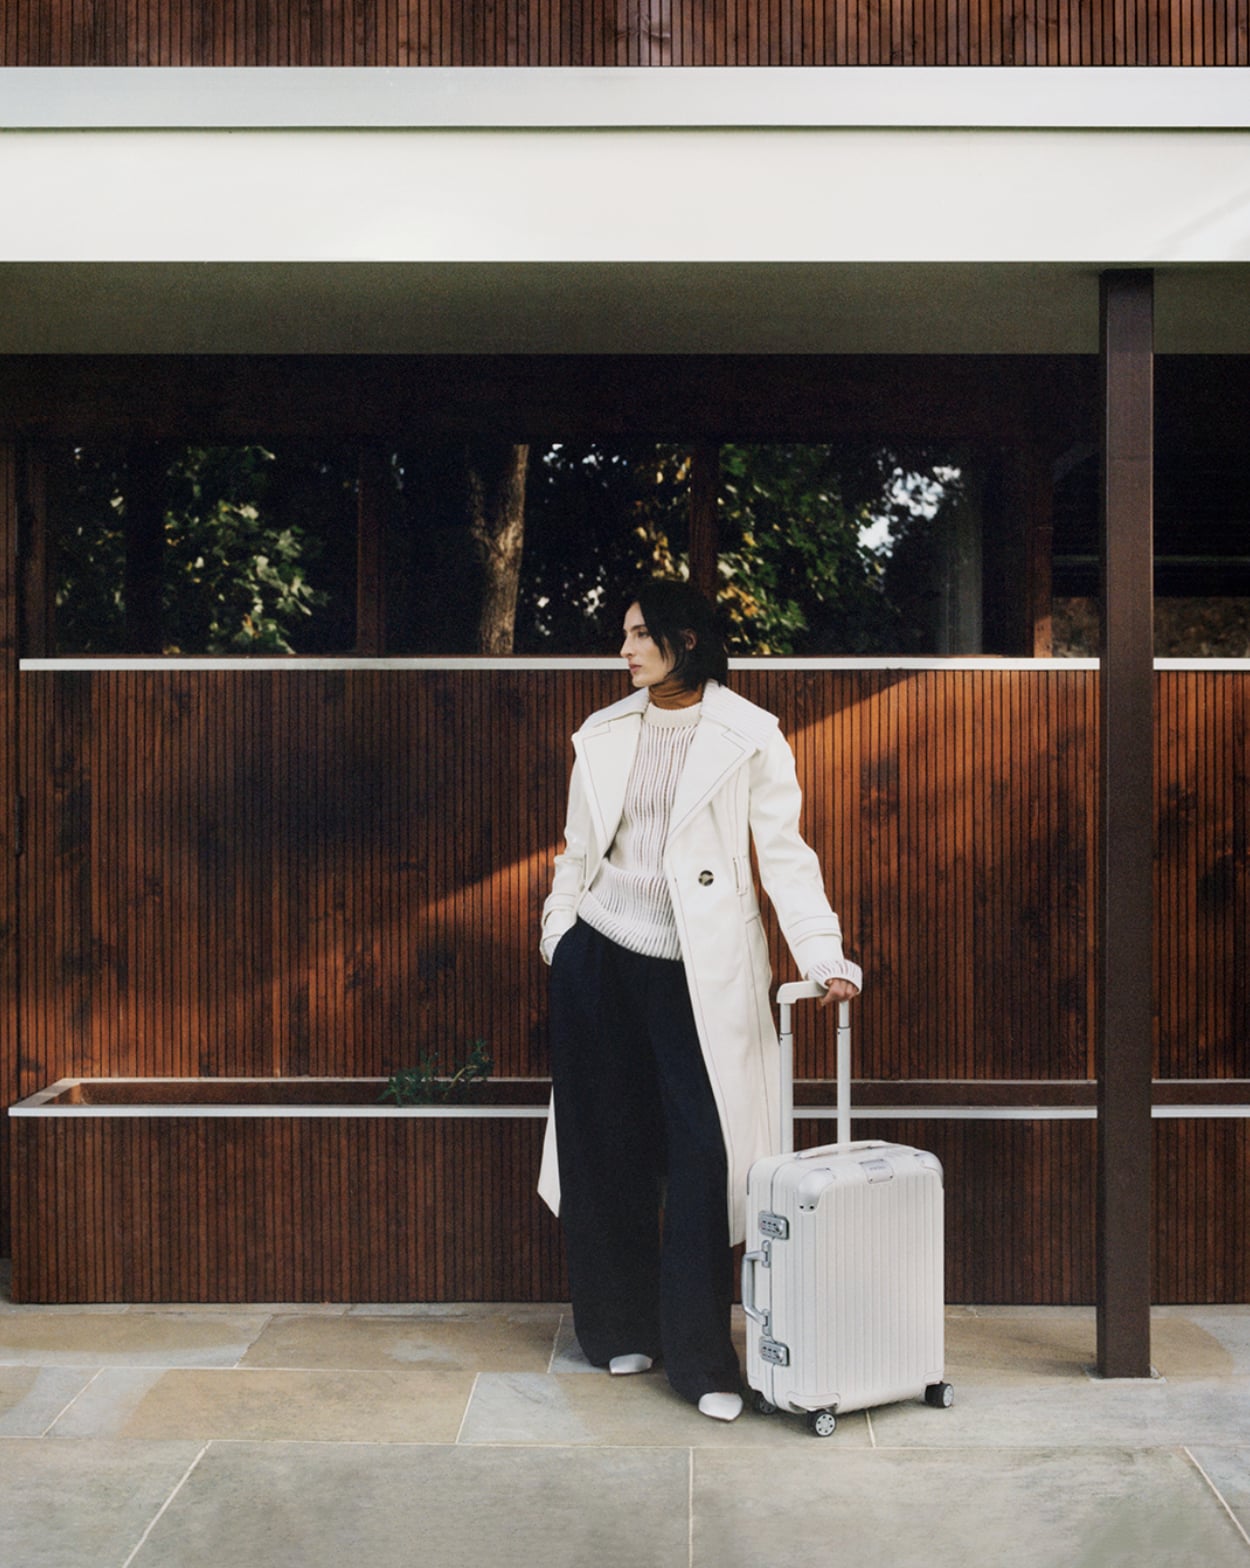 The 5 Best Carry-On Luggage Brands In 2023: Lightweight, Stylish, and  Practical Designs That Can Take You Anywhere - Adventure Family Travel -  Wandering Wagars